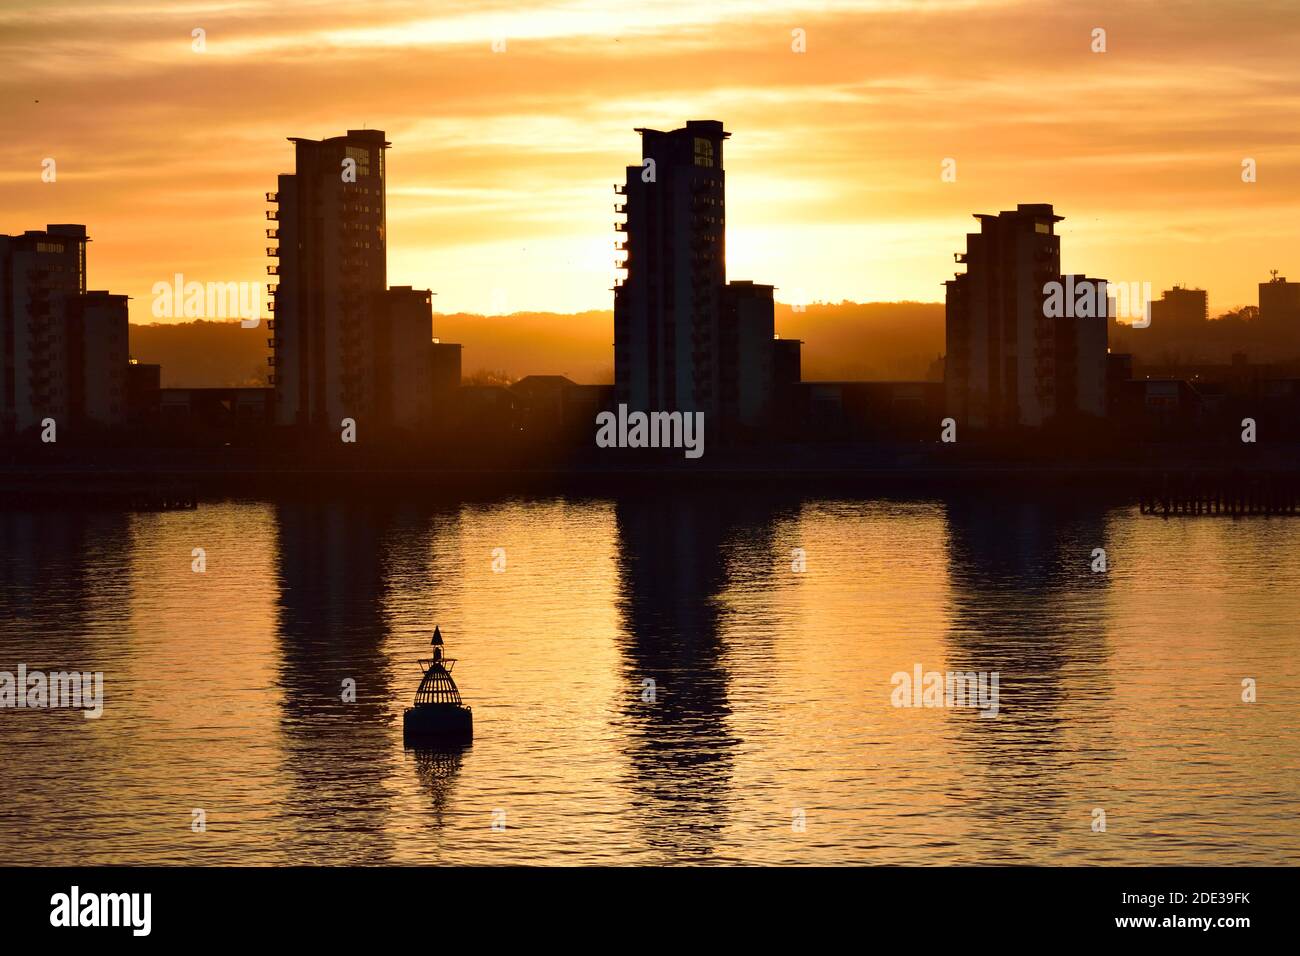 Golden sunrise with high-rise apartments next to the River Thames in London Stock Photo